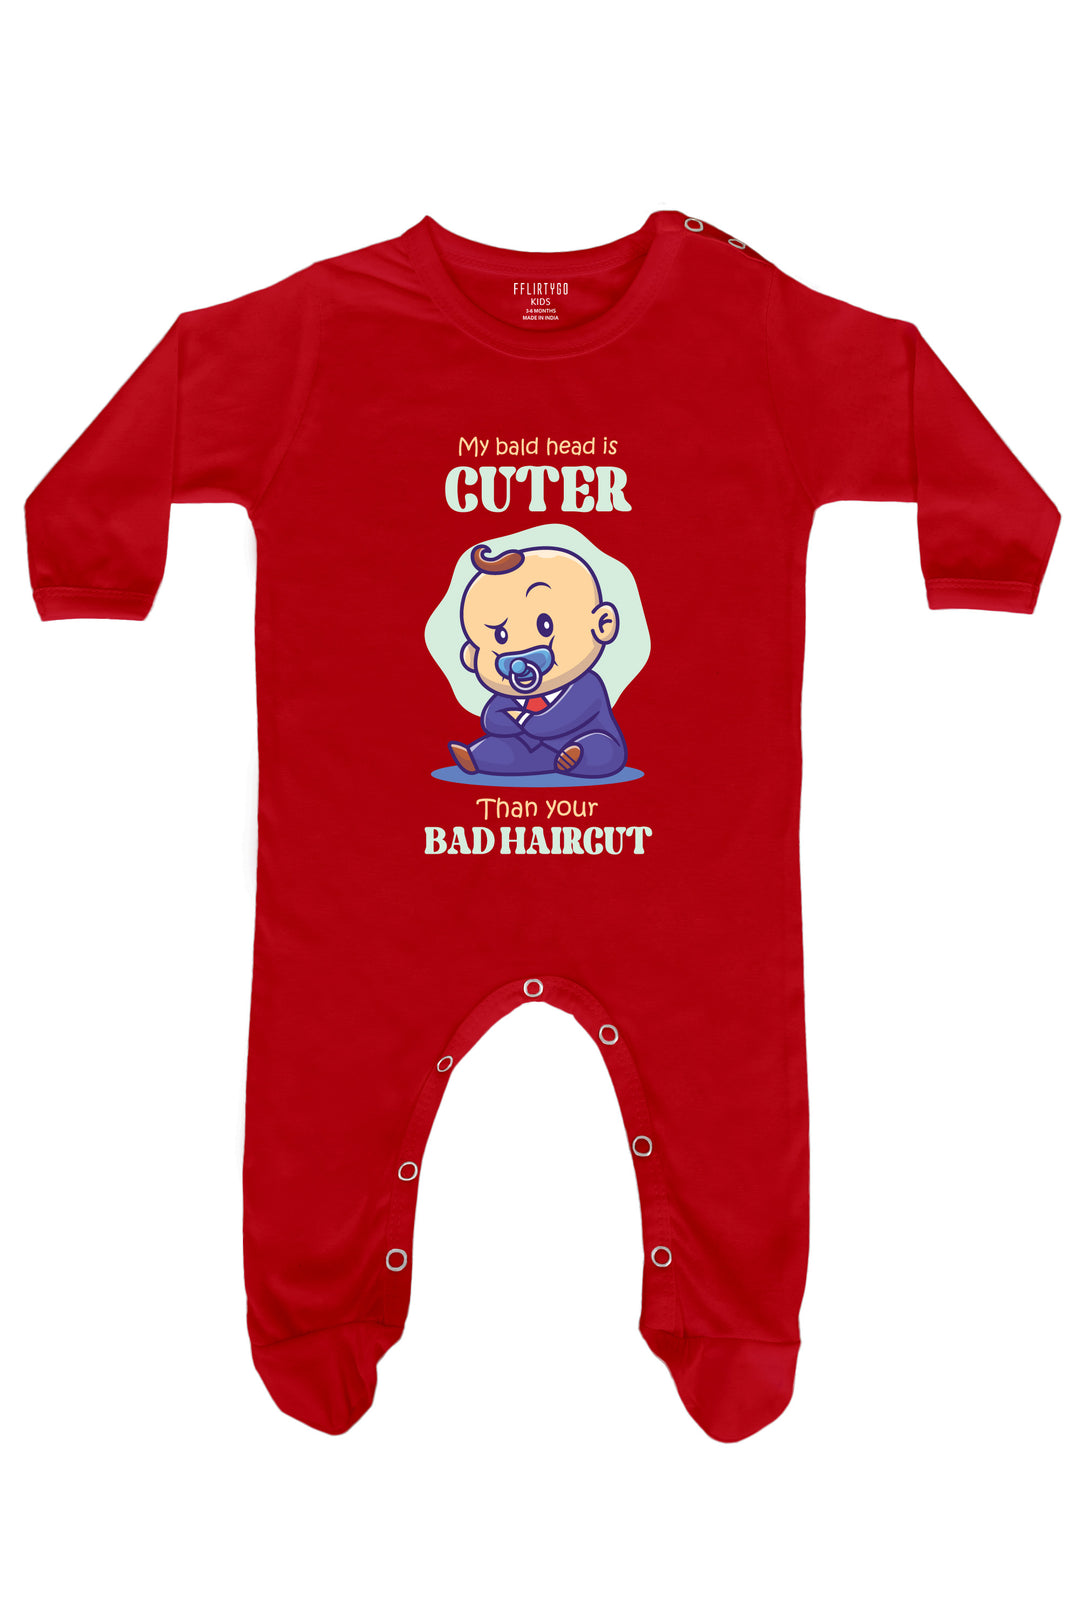 My Bald Head is Cuter Than Your Bad Haircut Baby Romper | Onesies